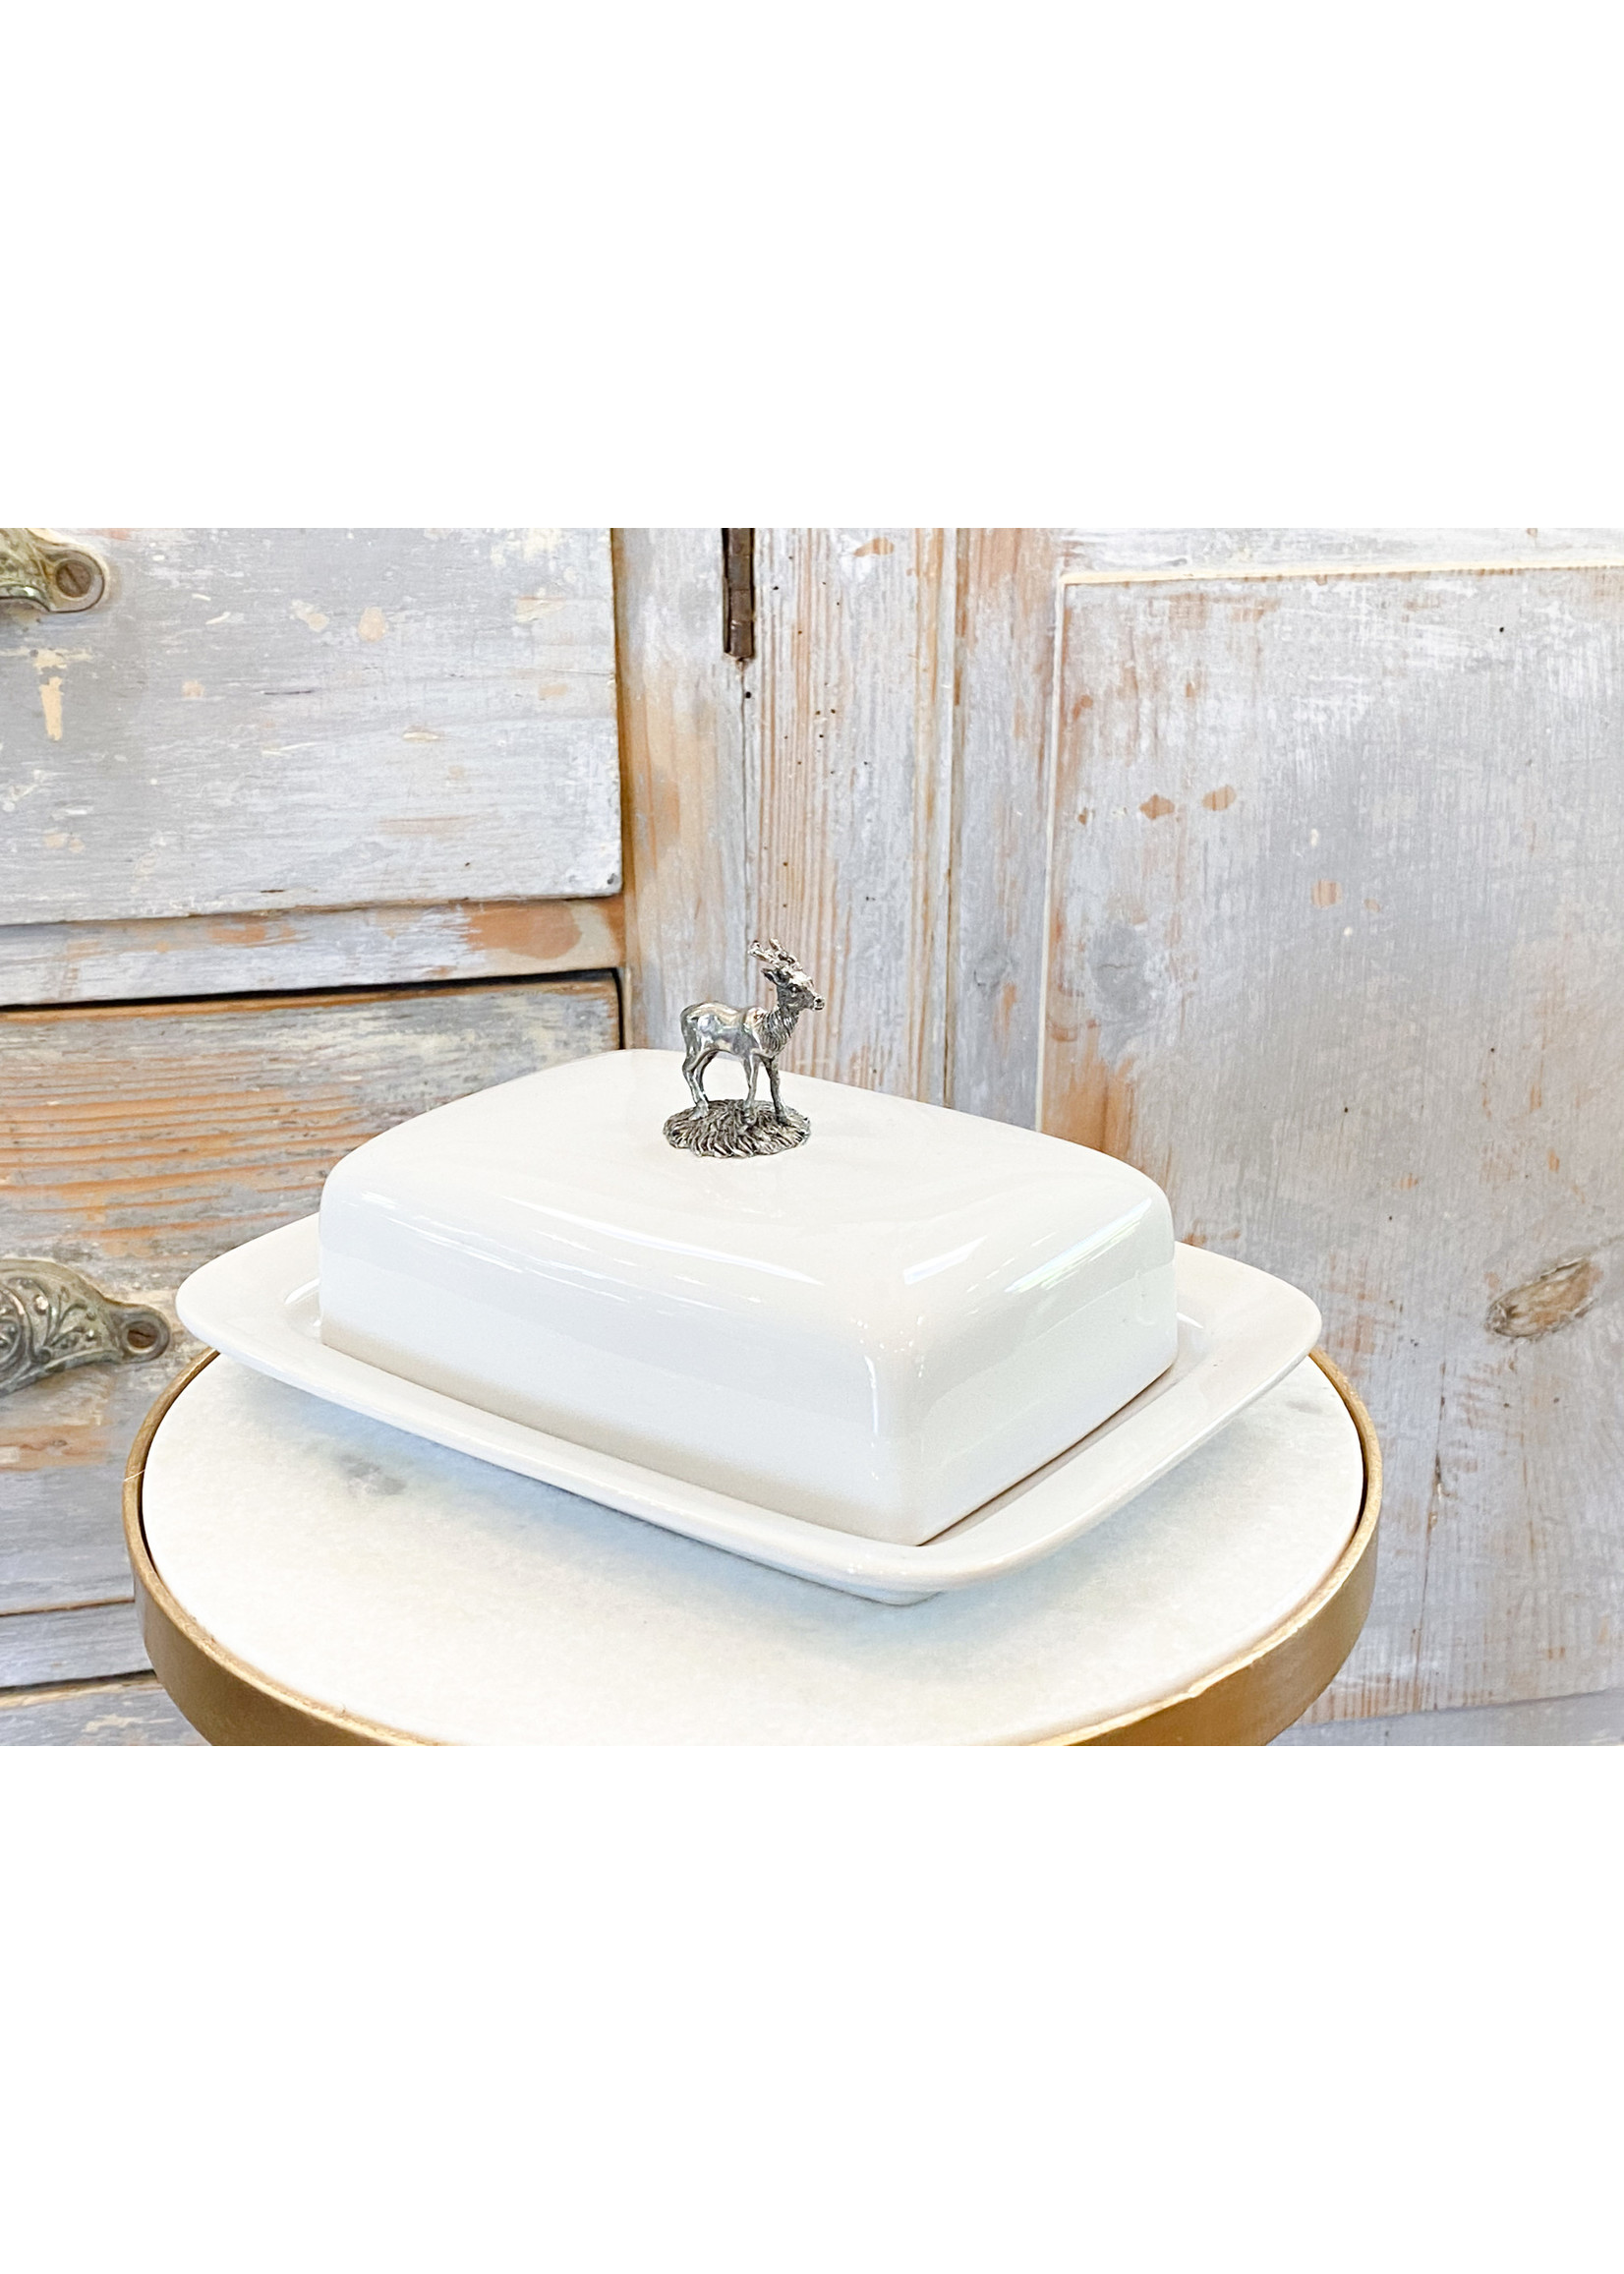 Butter Dish - Stag